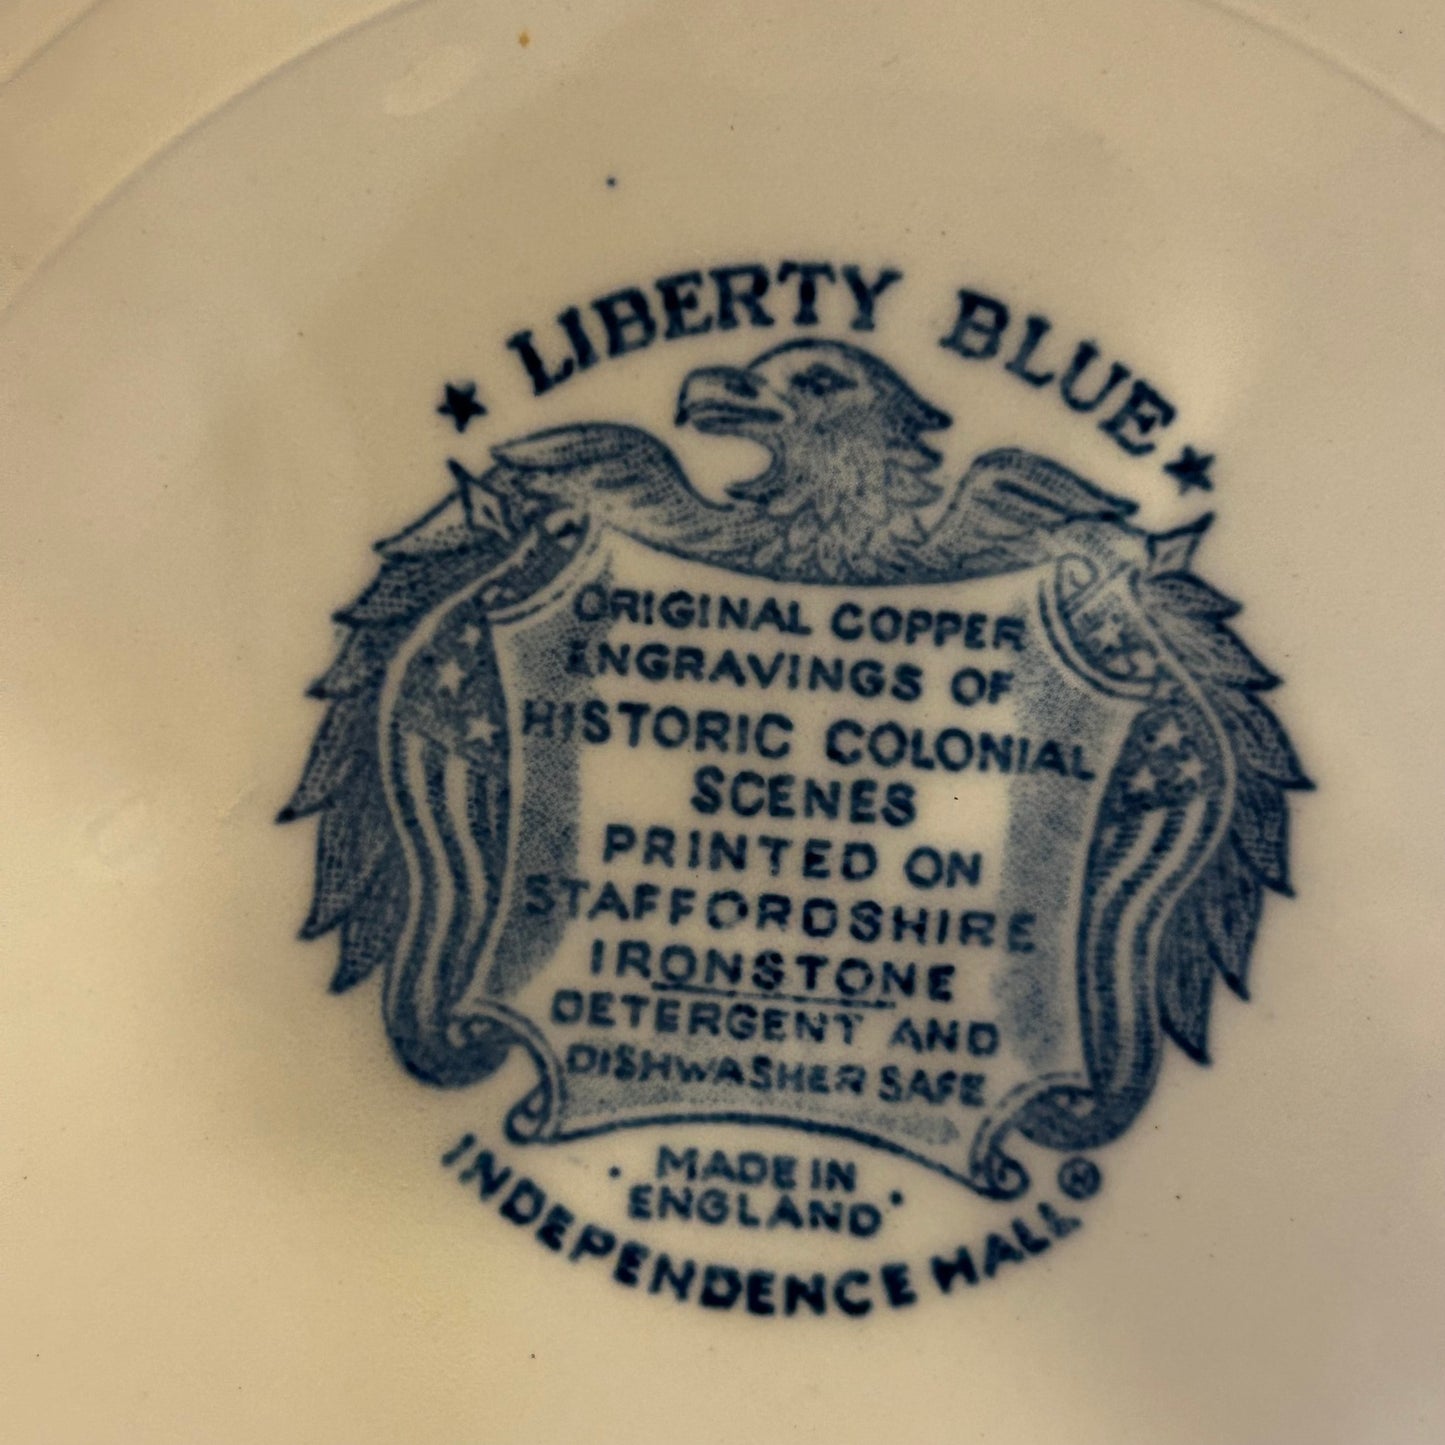 Vintage Staffordshire Of England Liberty Blue dinner Plate